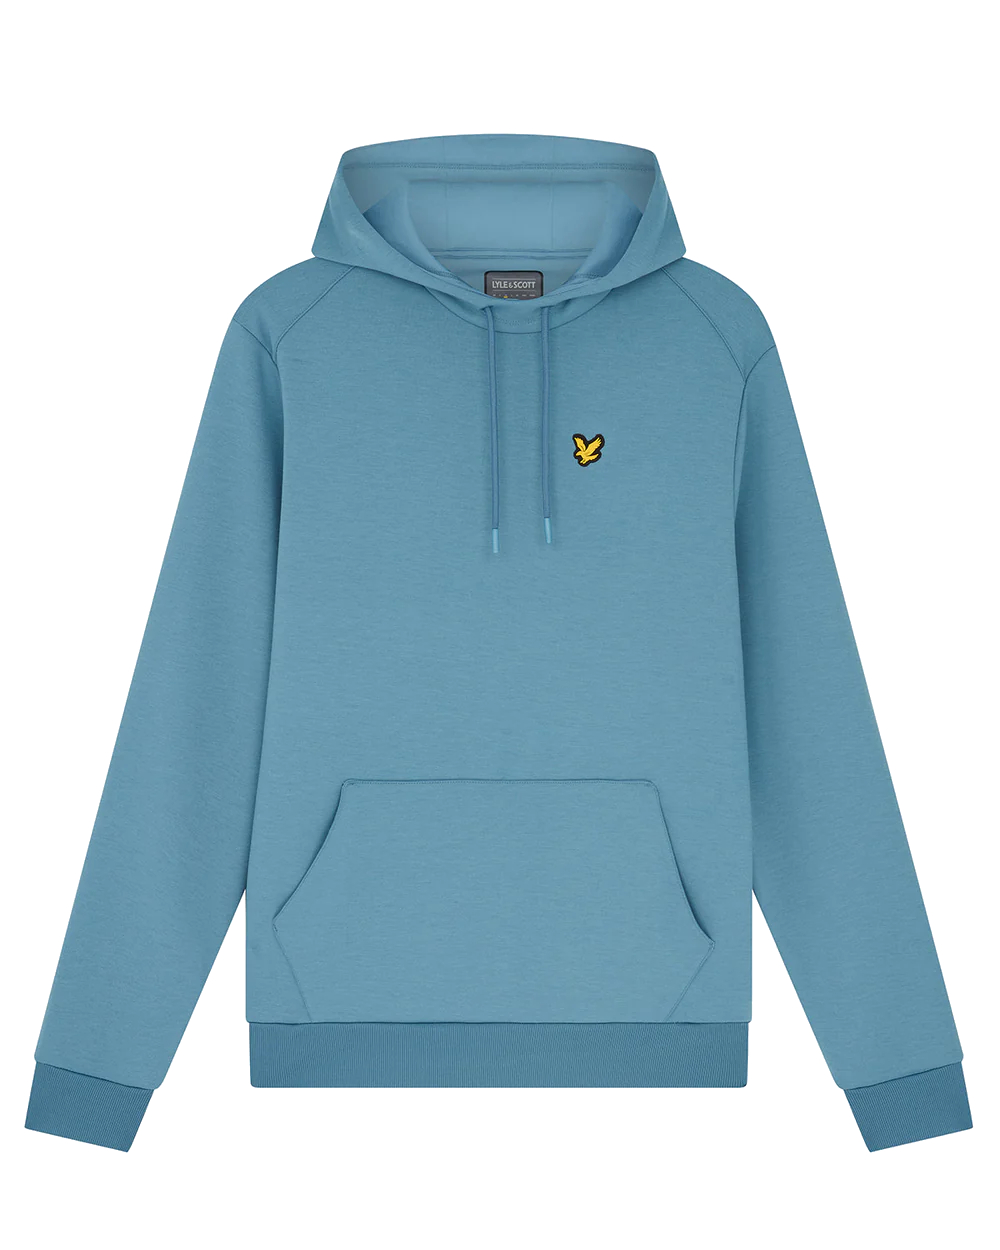 Lyle and Scott OTH Fly Fleece Hoodie casual sweater heren